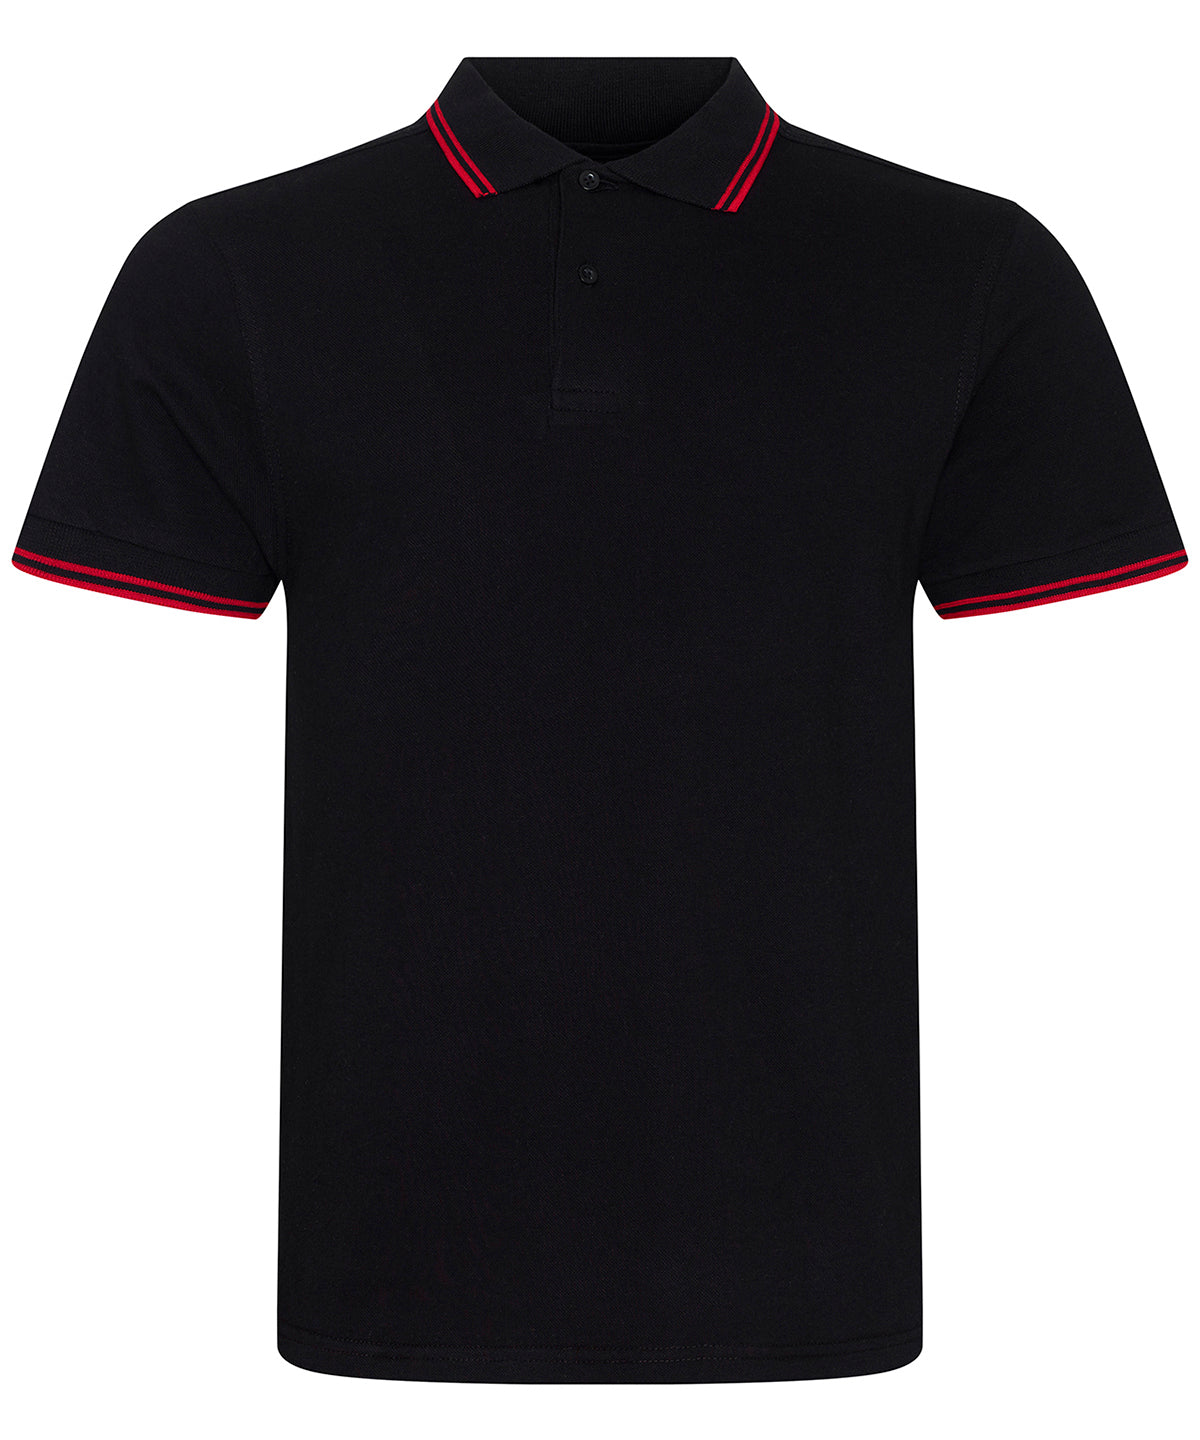 Personalised Polo Shirts - Black AWDis Just Polo's Stretch tipped polo